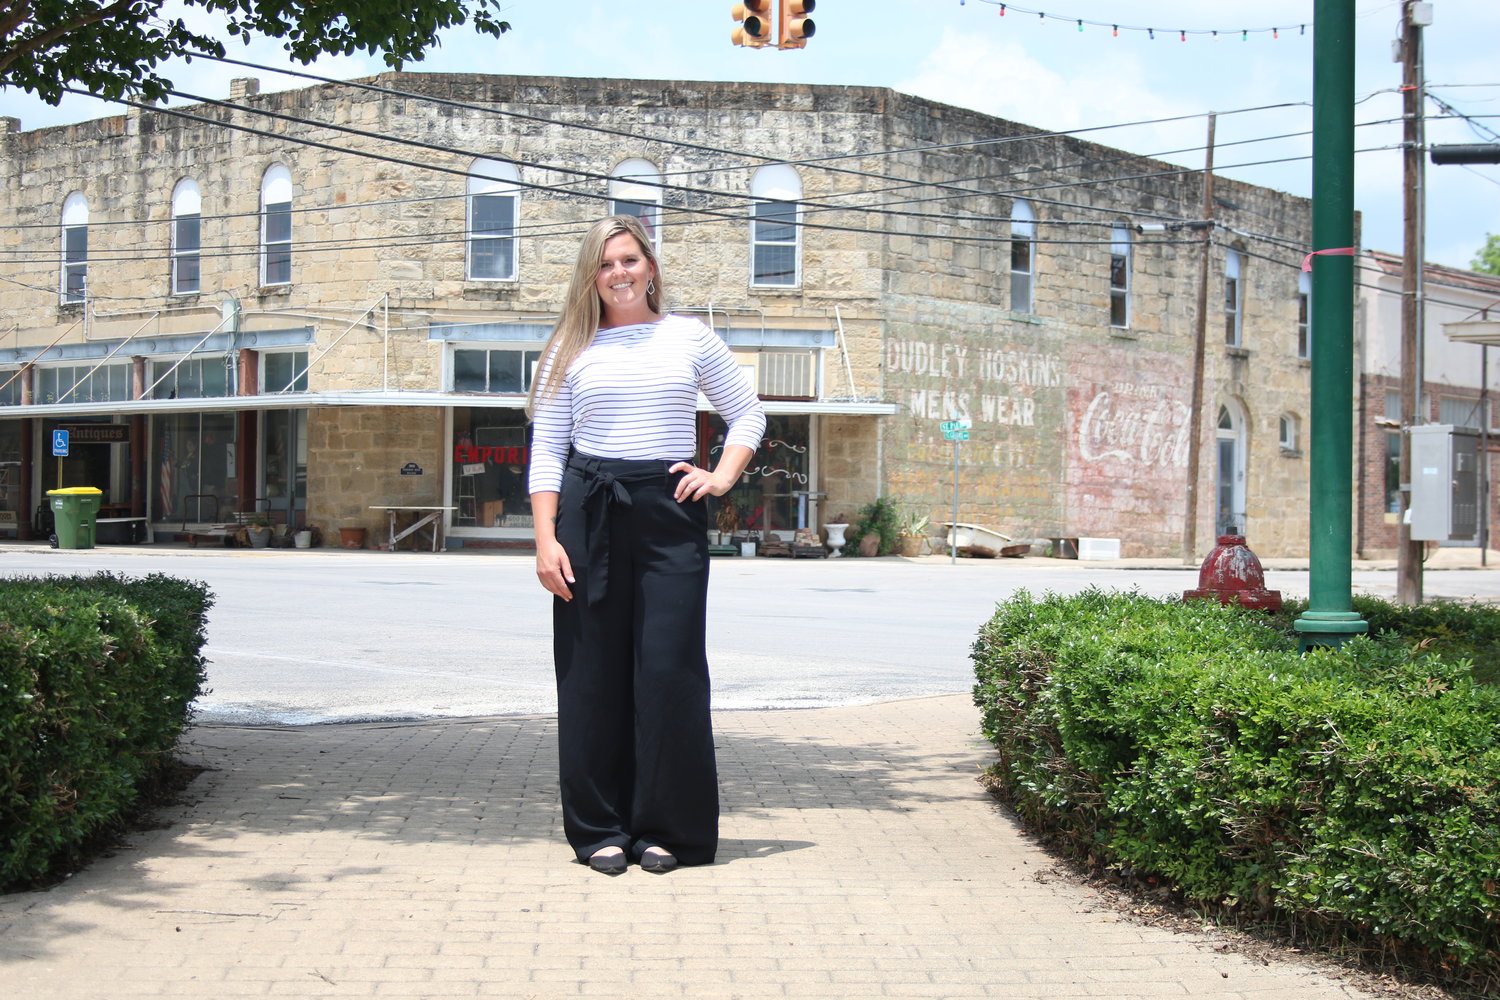 Liz Reiley hopes to bring everything she learned during her time at the chamber of commerce to her new position as Main Street director.